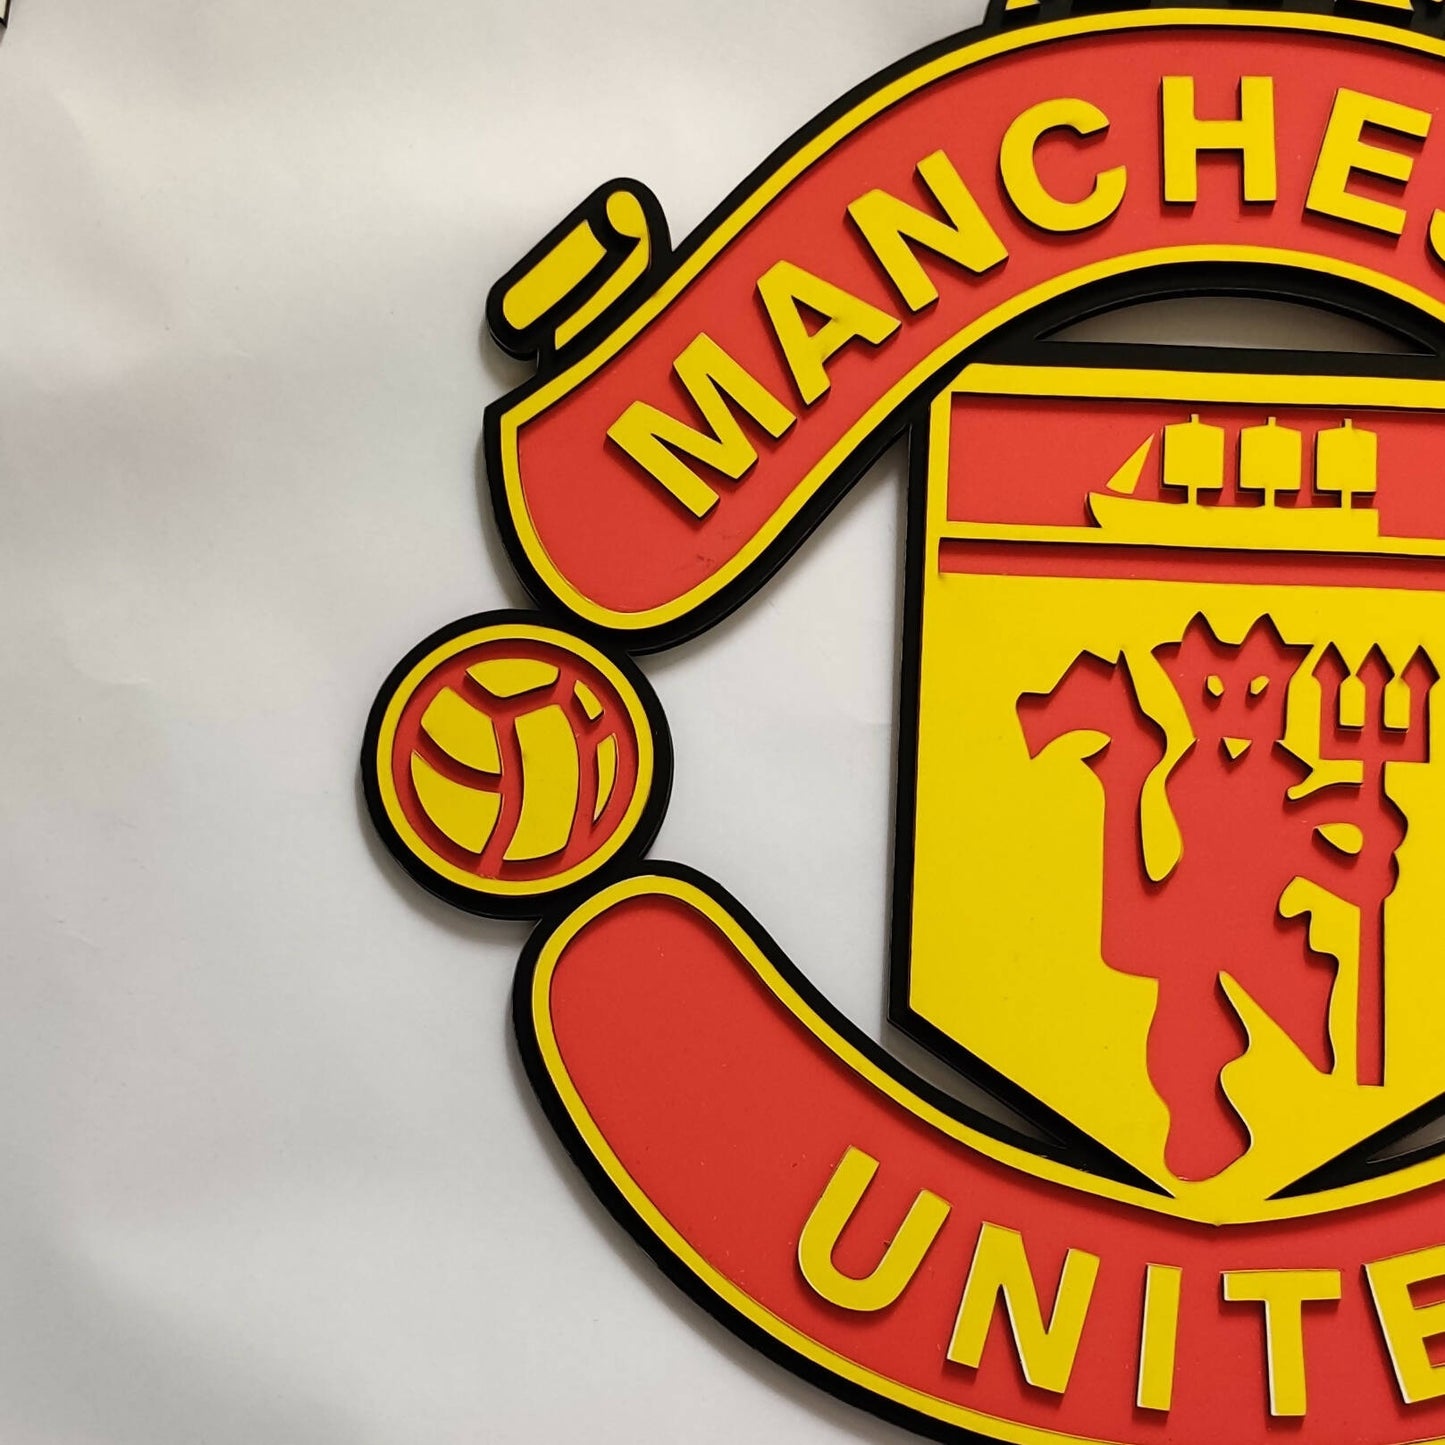 Manchester united wall art 15 inches yellow and red